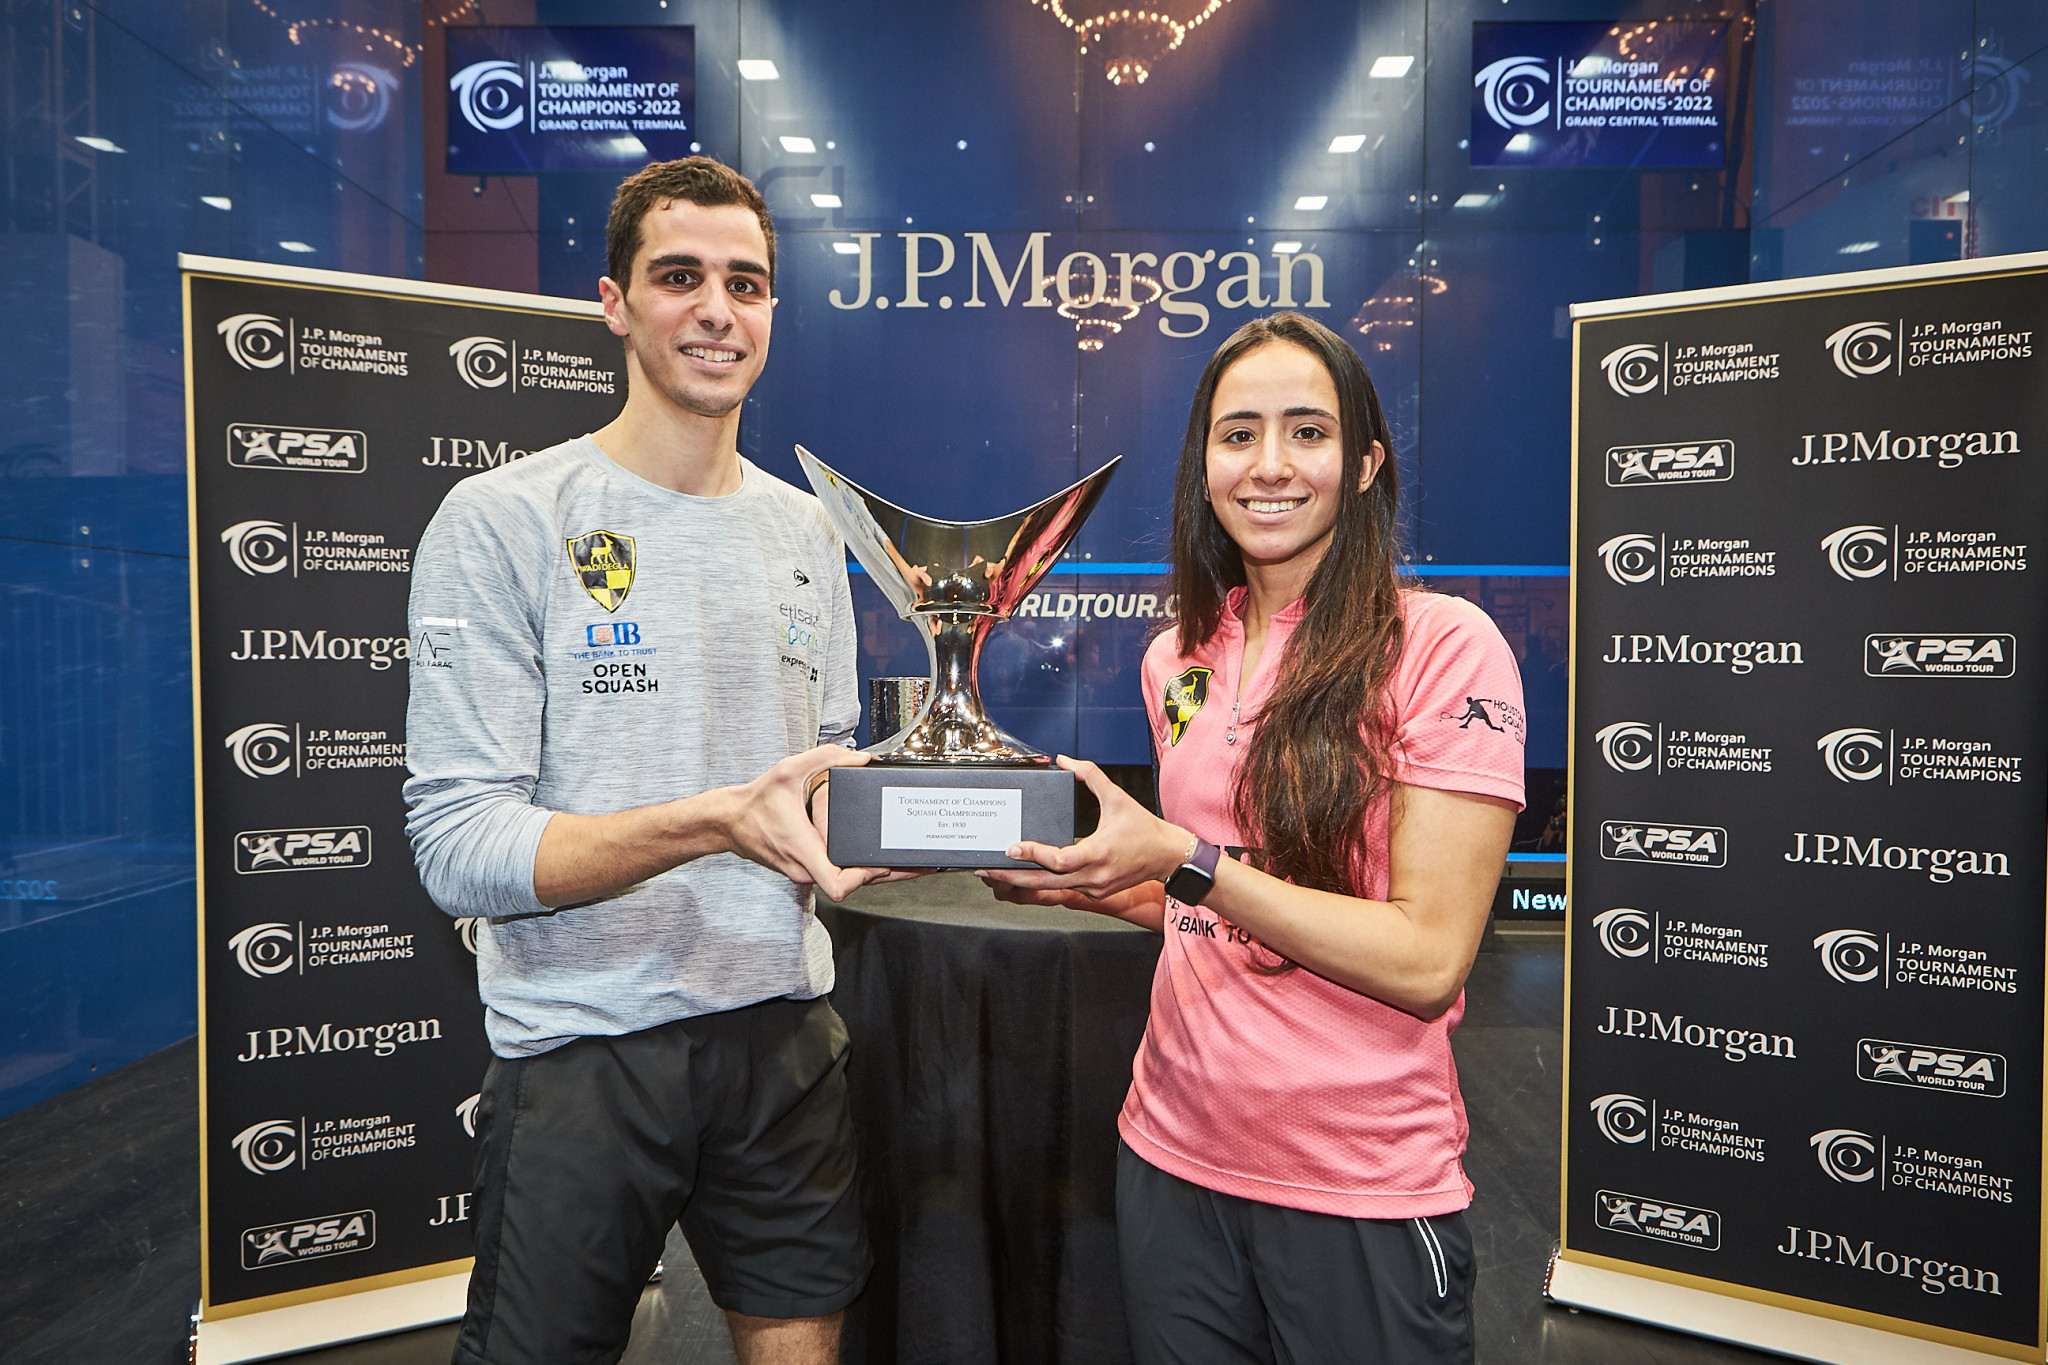 Ali Farag, left, and Nouran Gohar claimed titles at the Tournament of Champions ©PSA World Tour